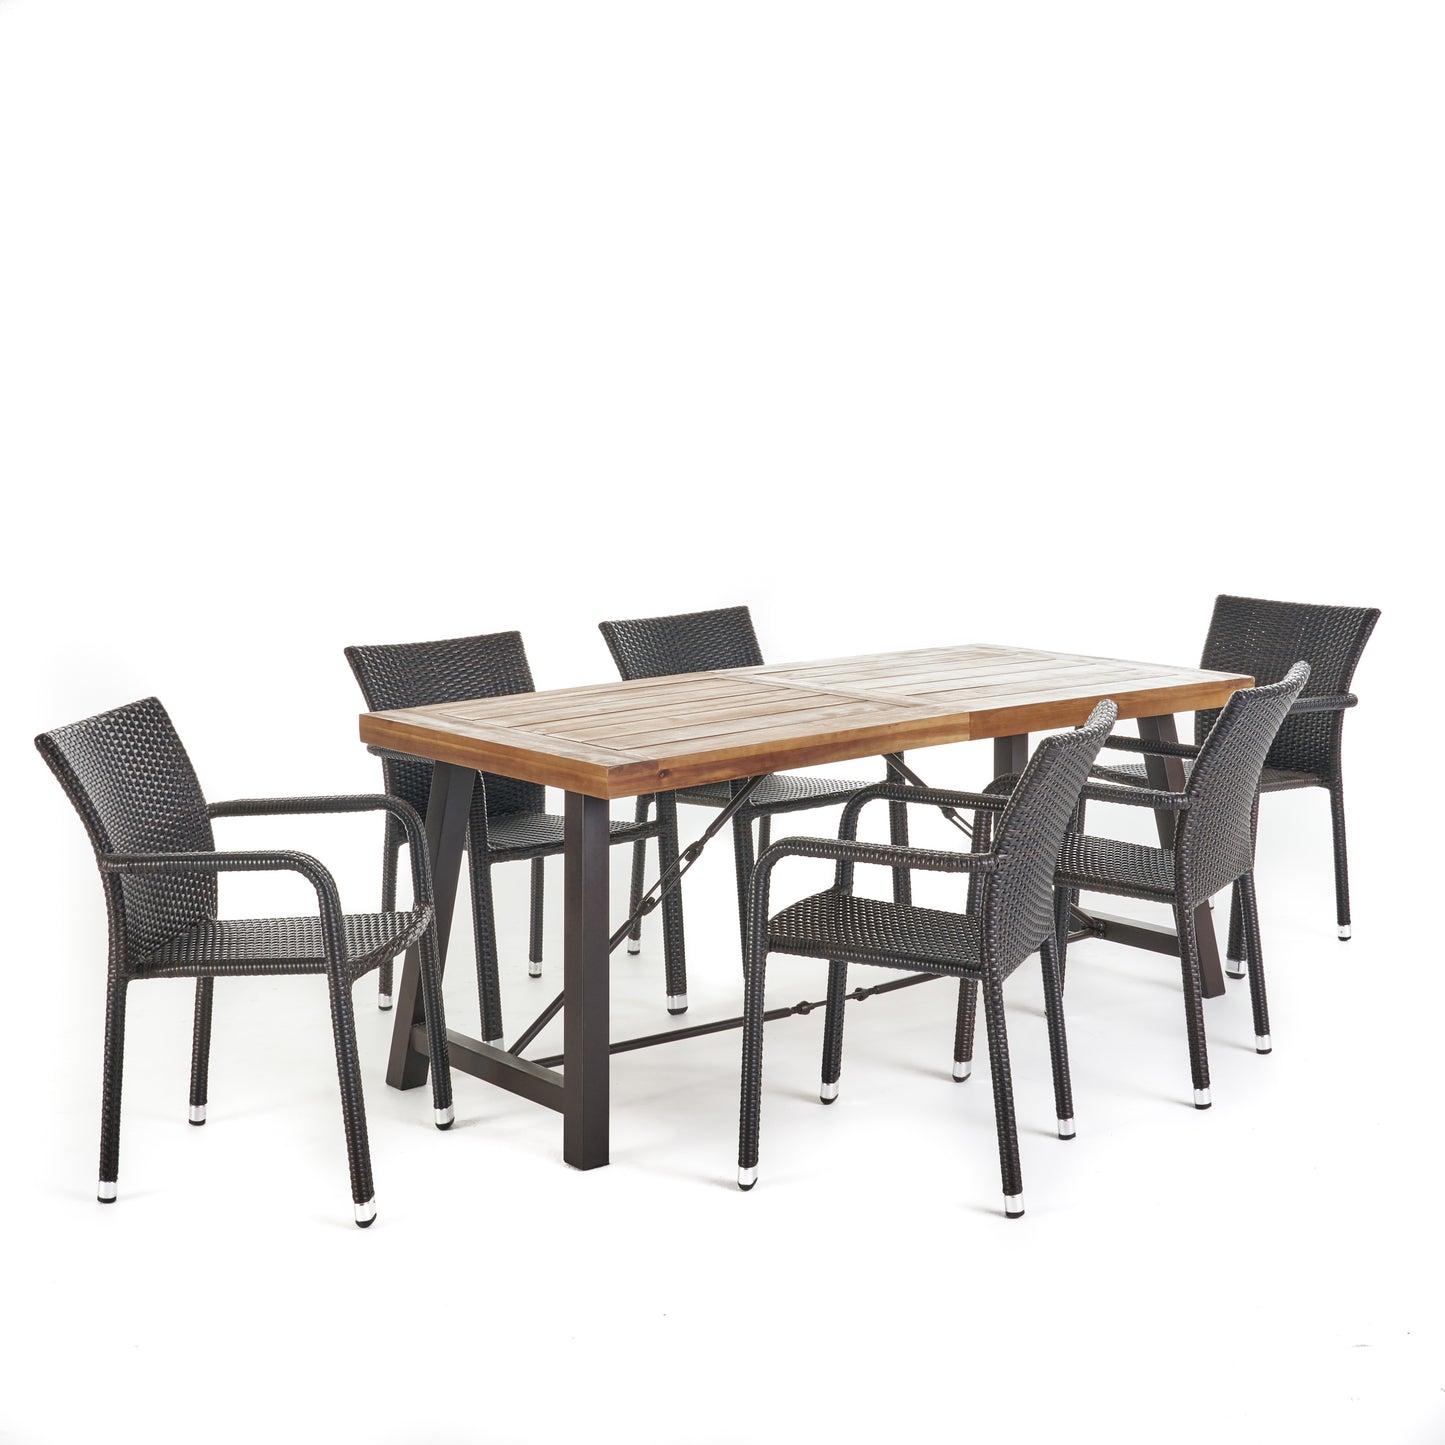 Spiegel Outdoor 7 Piece Dining Set with Teak Finished Wood Table and Brown Chairs